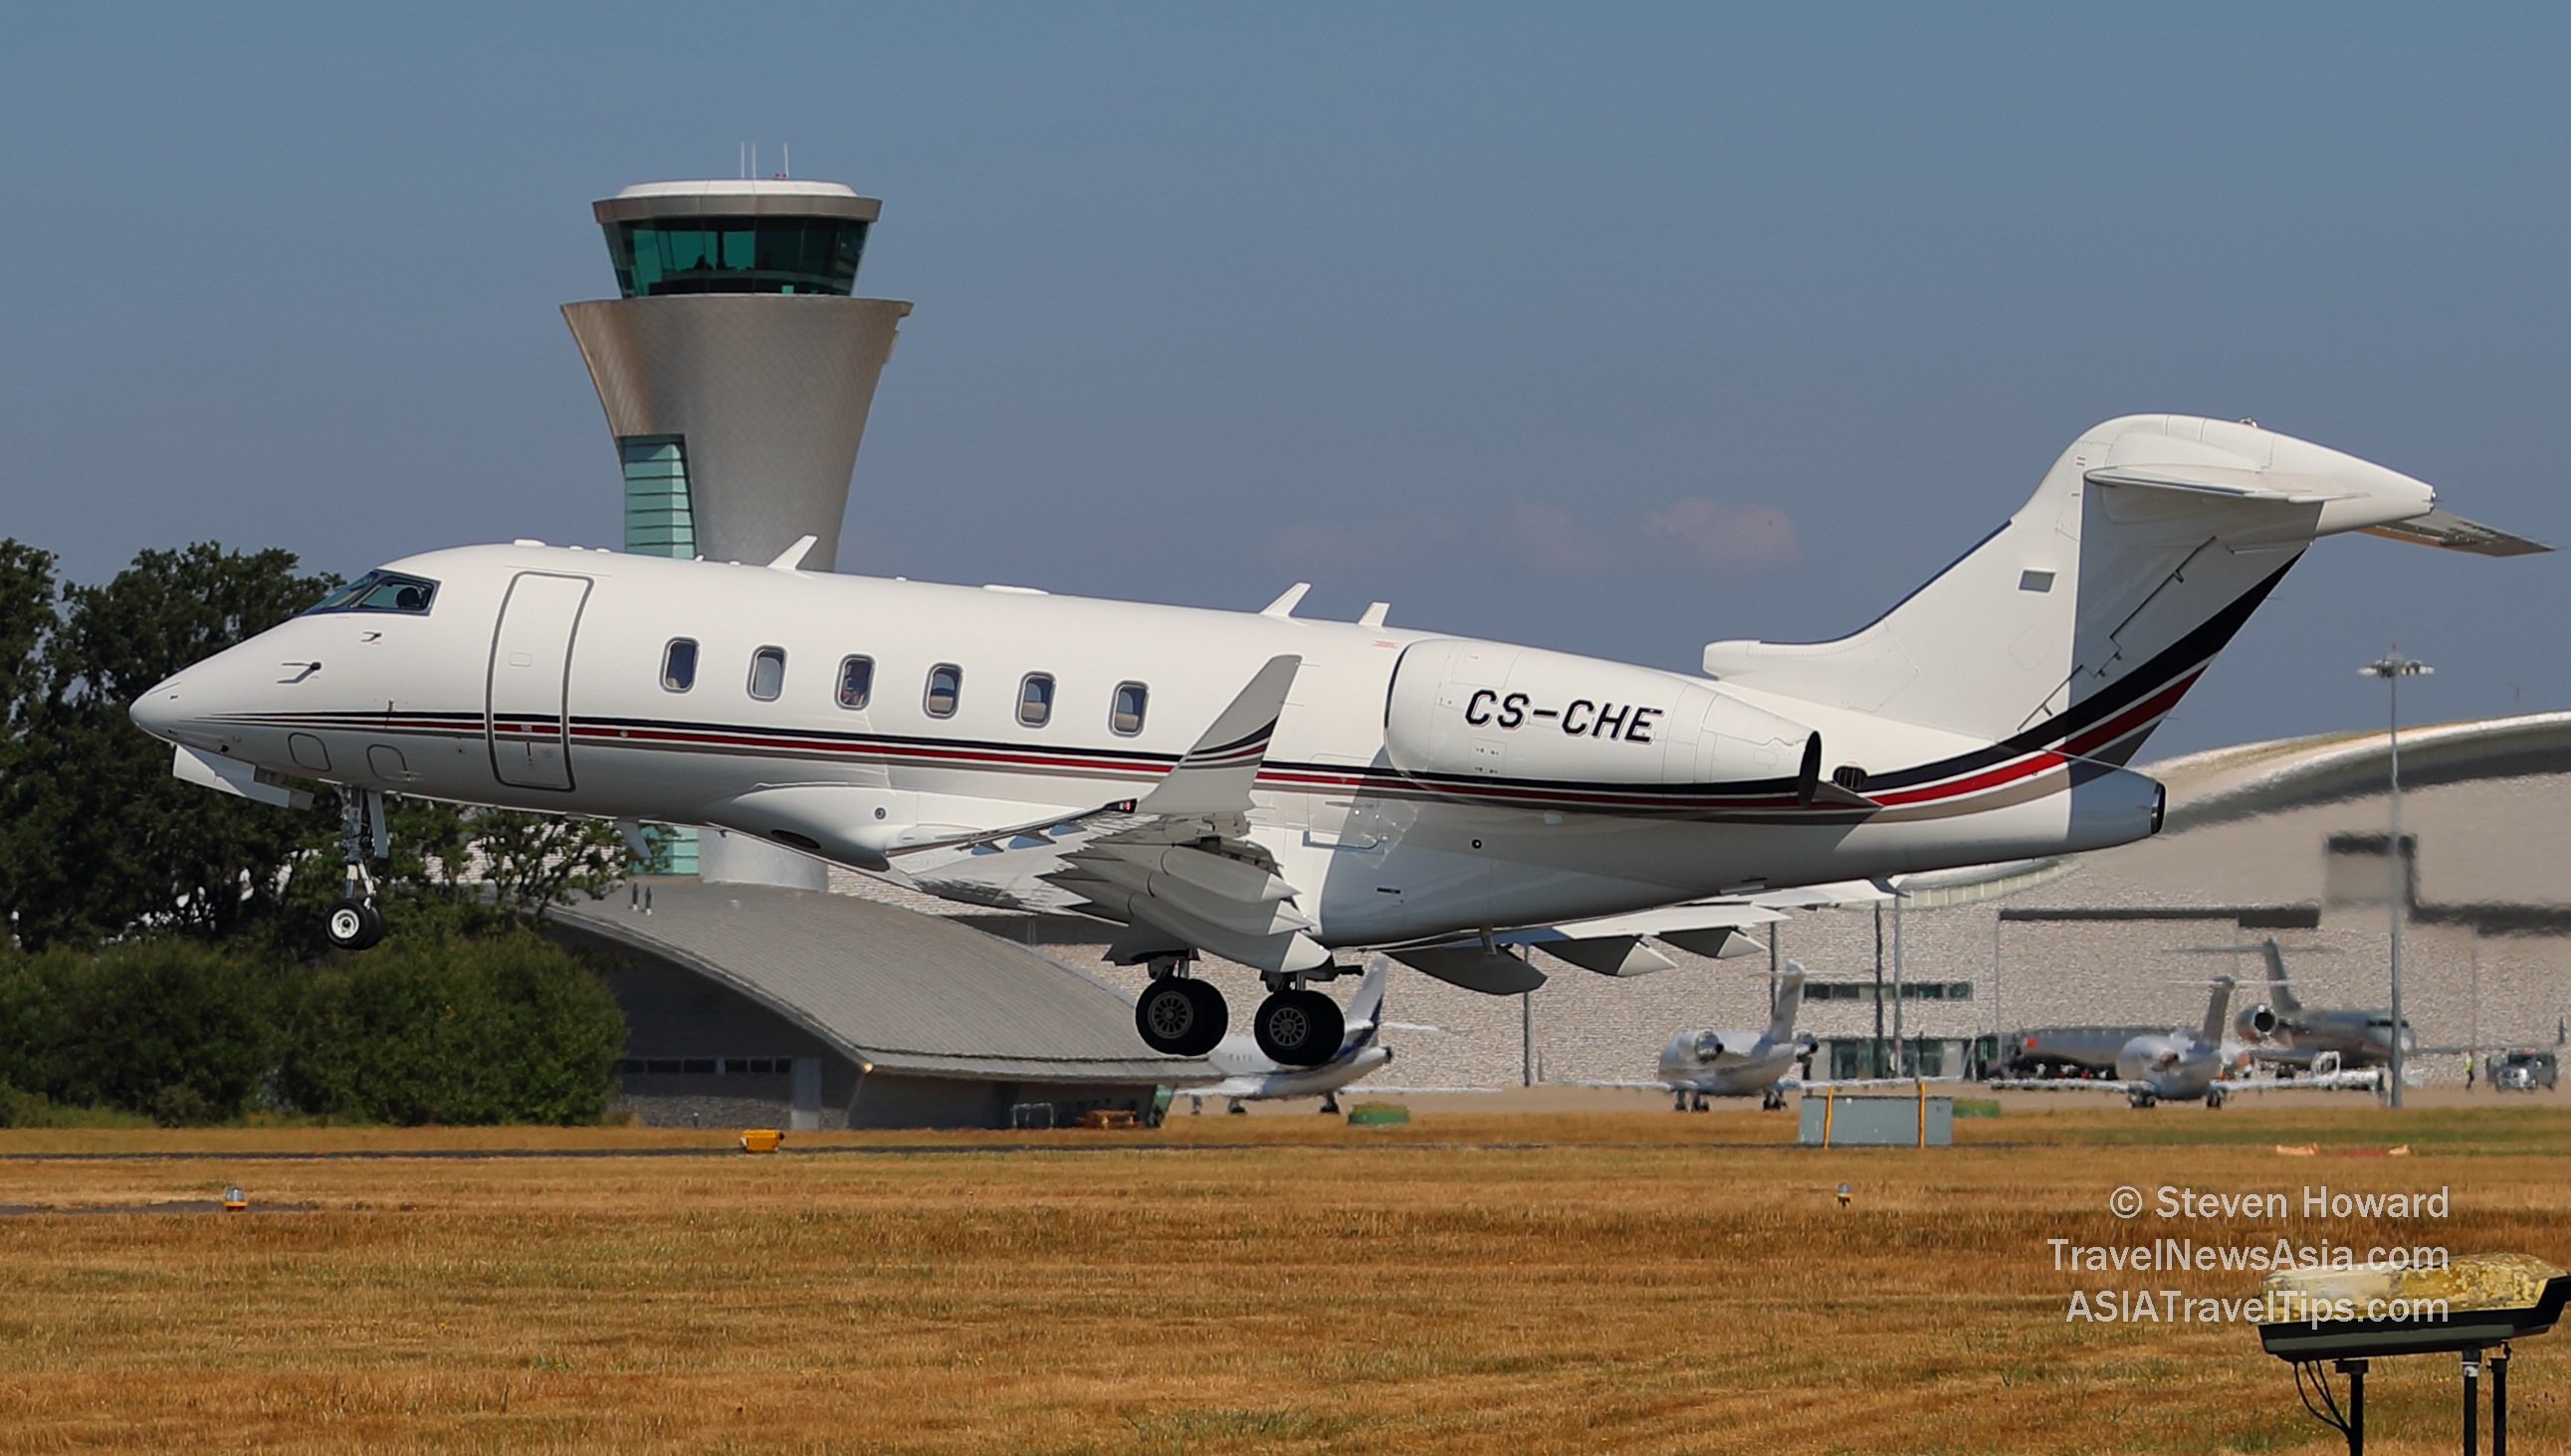 Bombardier Challenger 350 reg: CS-CHE. Picture by Steven Howard of TravelNewsAsia.com Click to enlarge.